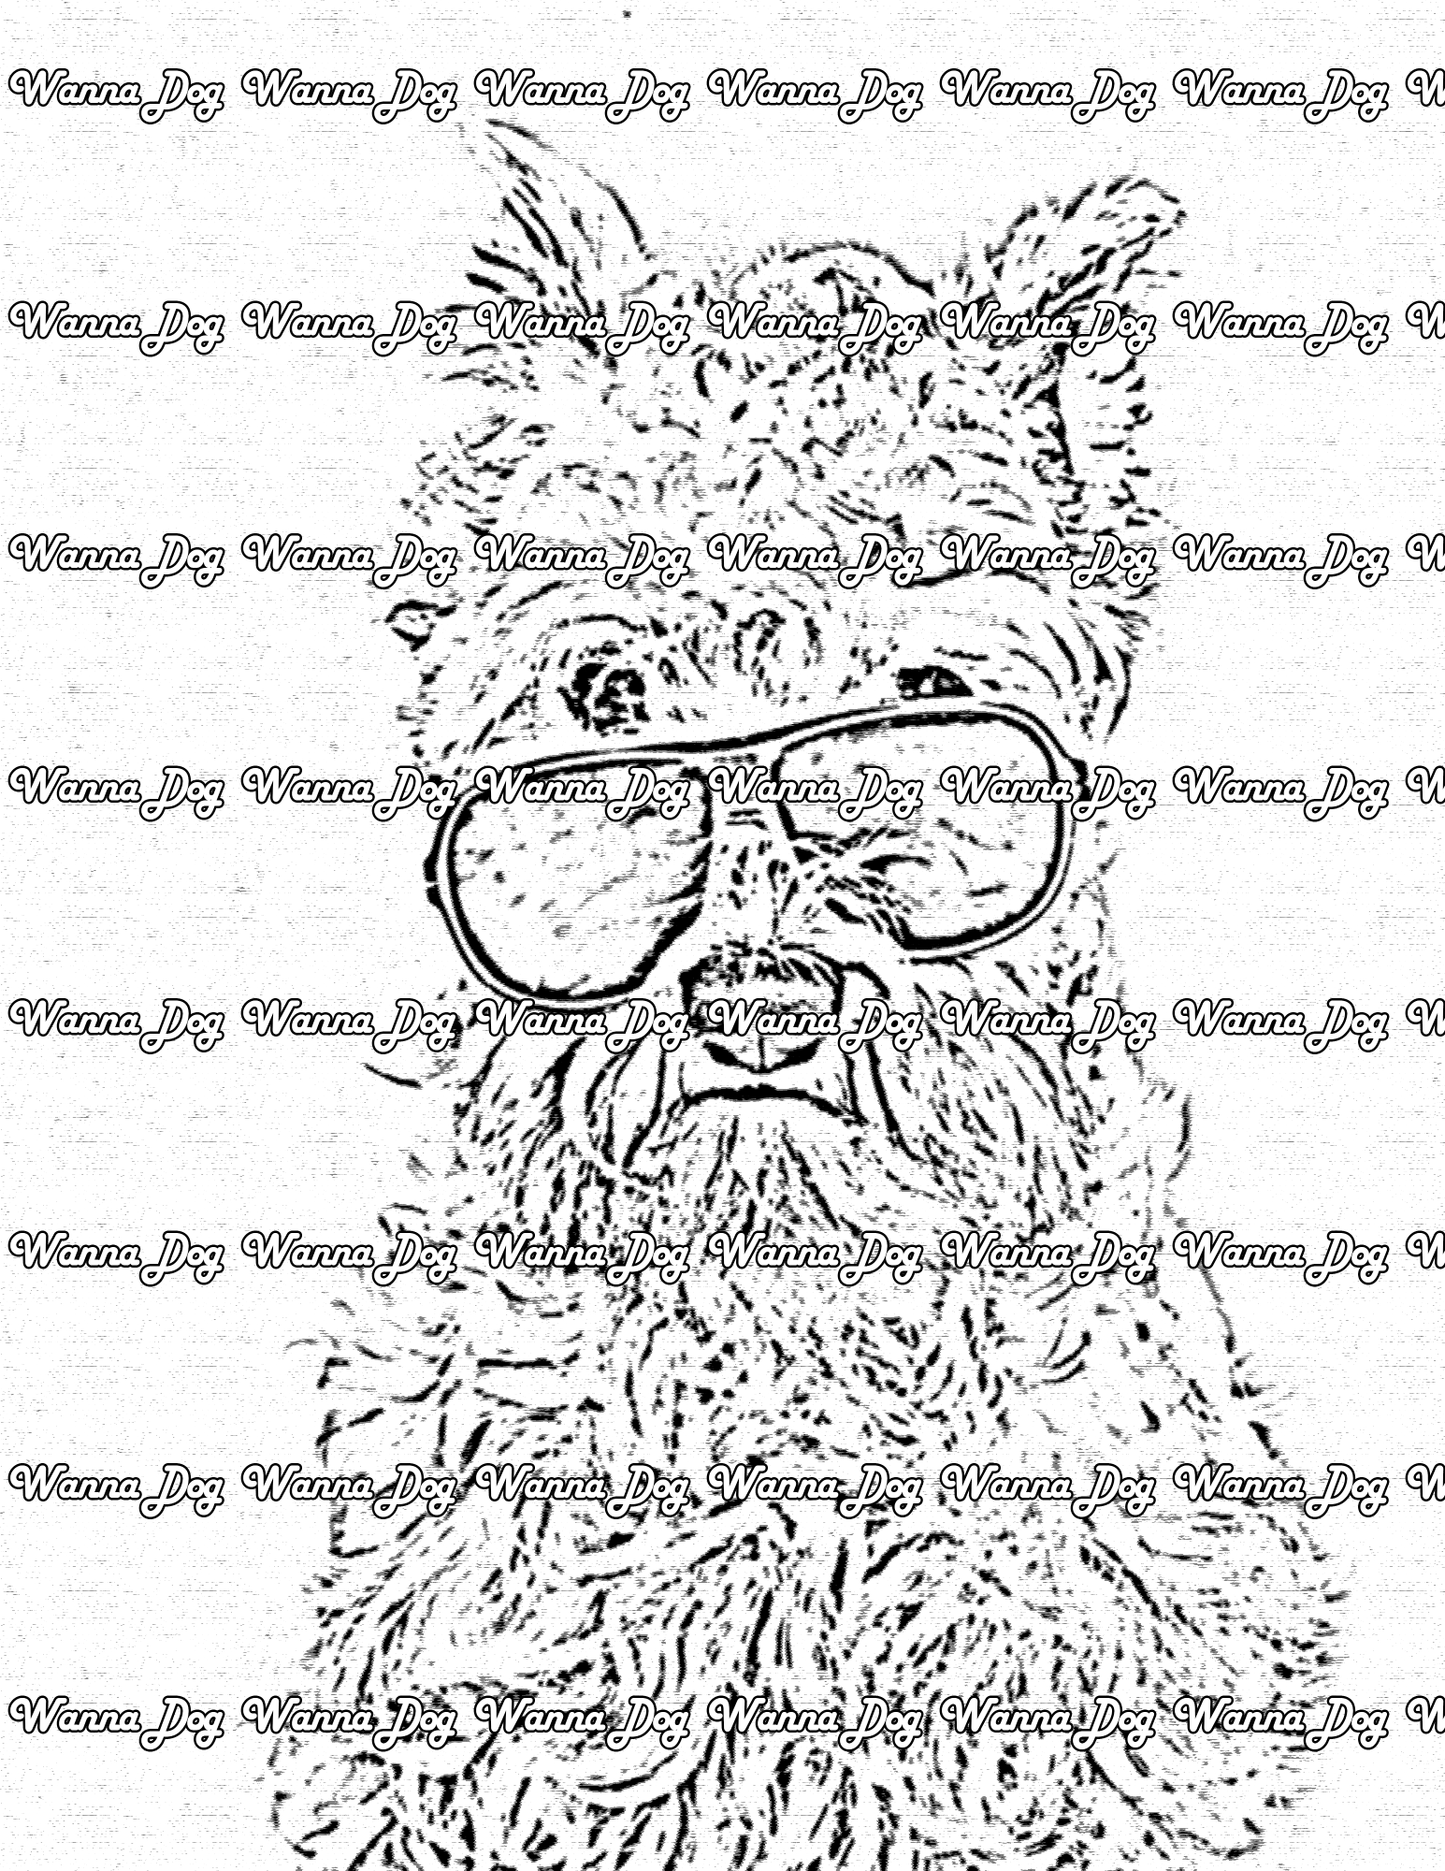 Schnauzer Coloring Page of a Schnauzer wearing glasses